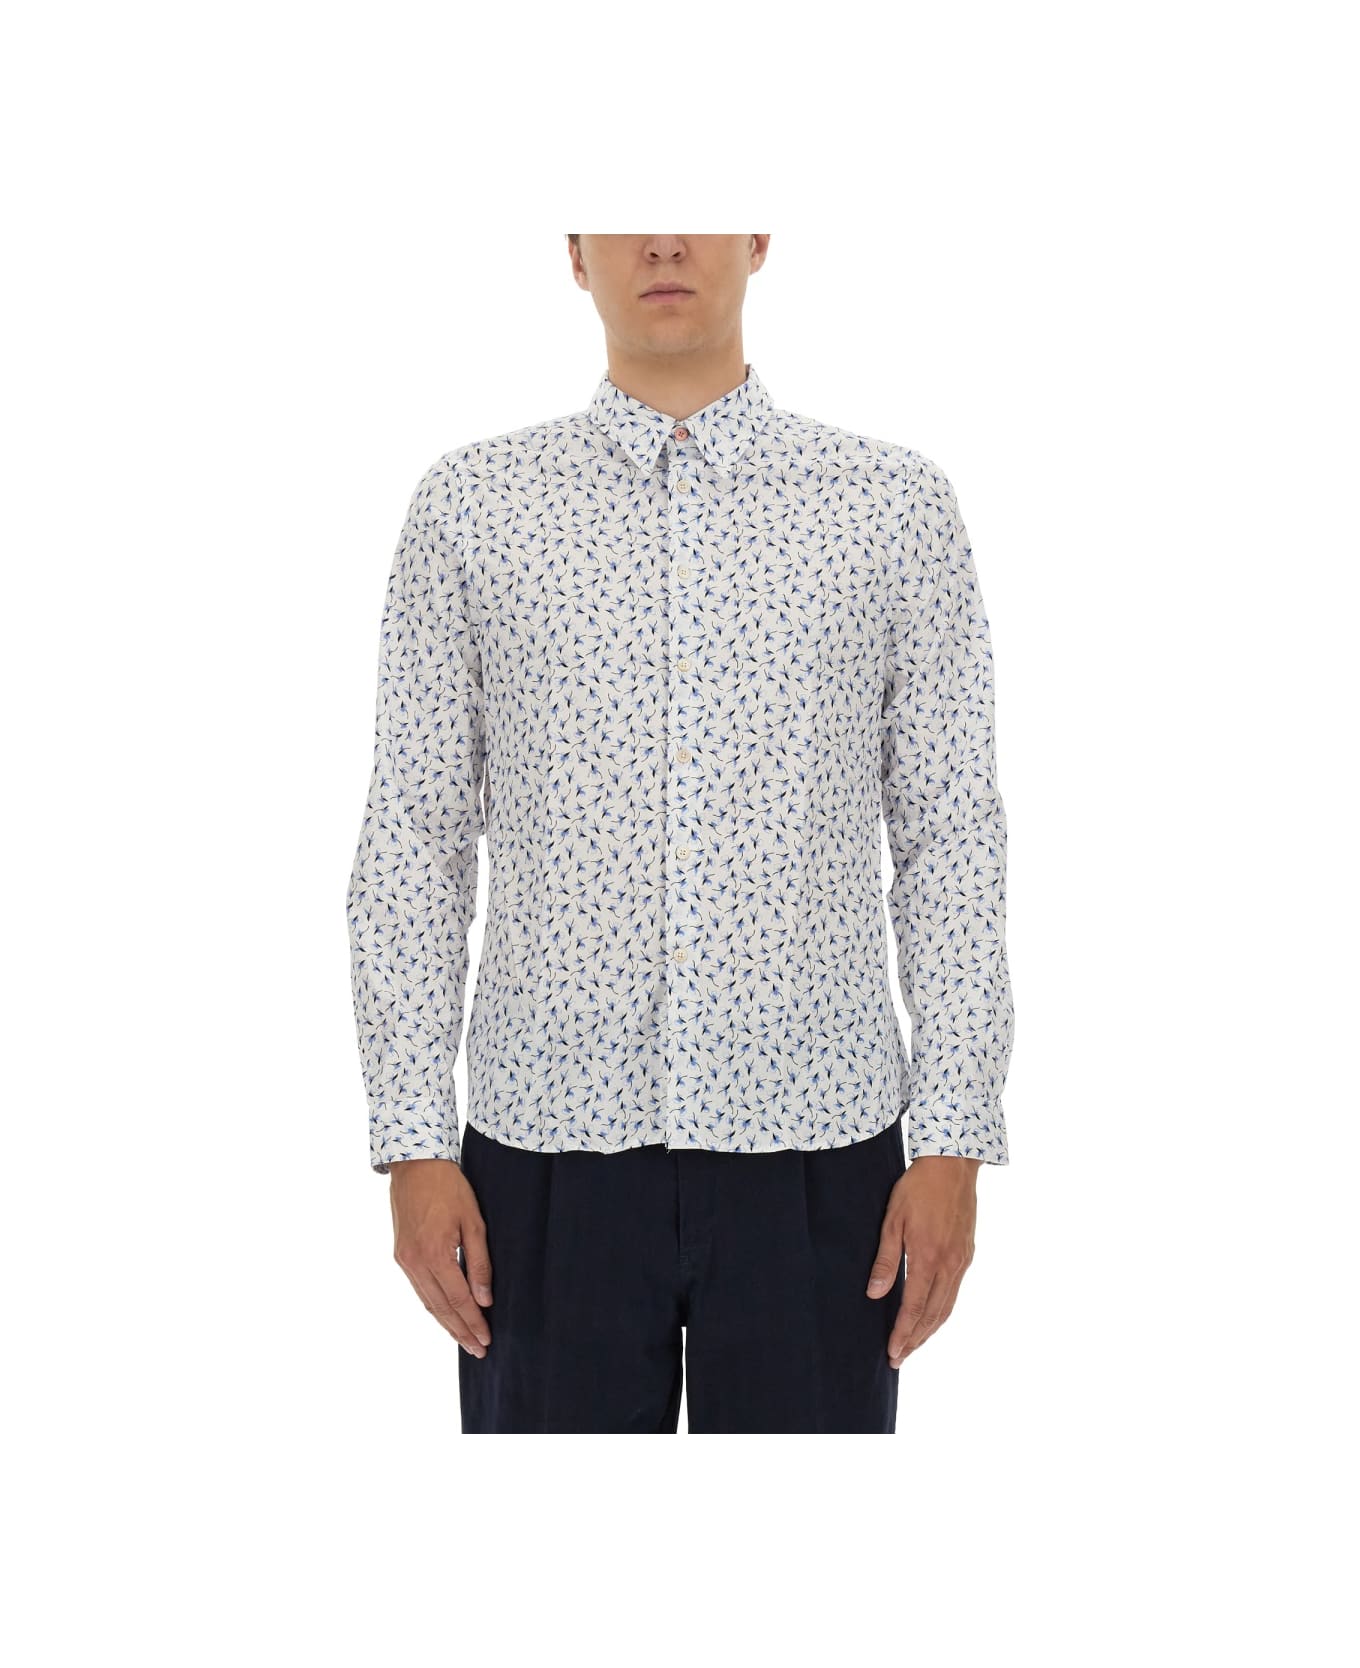 PS by Paul Smith Printed Shirt - WHITE